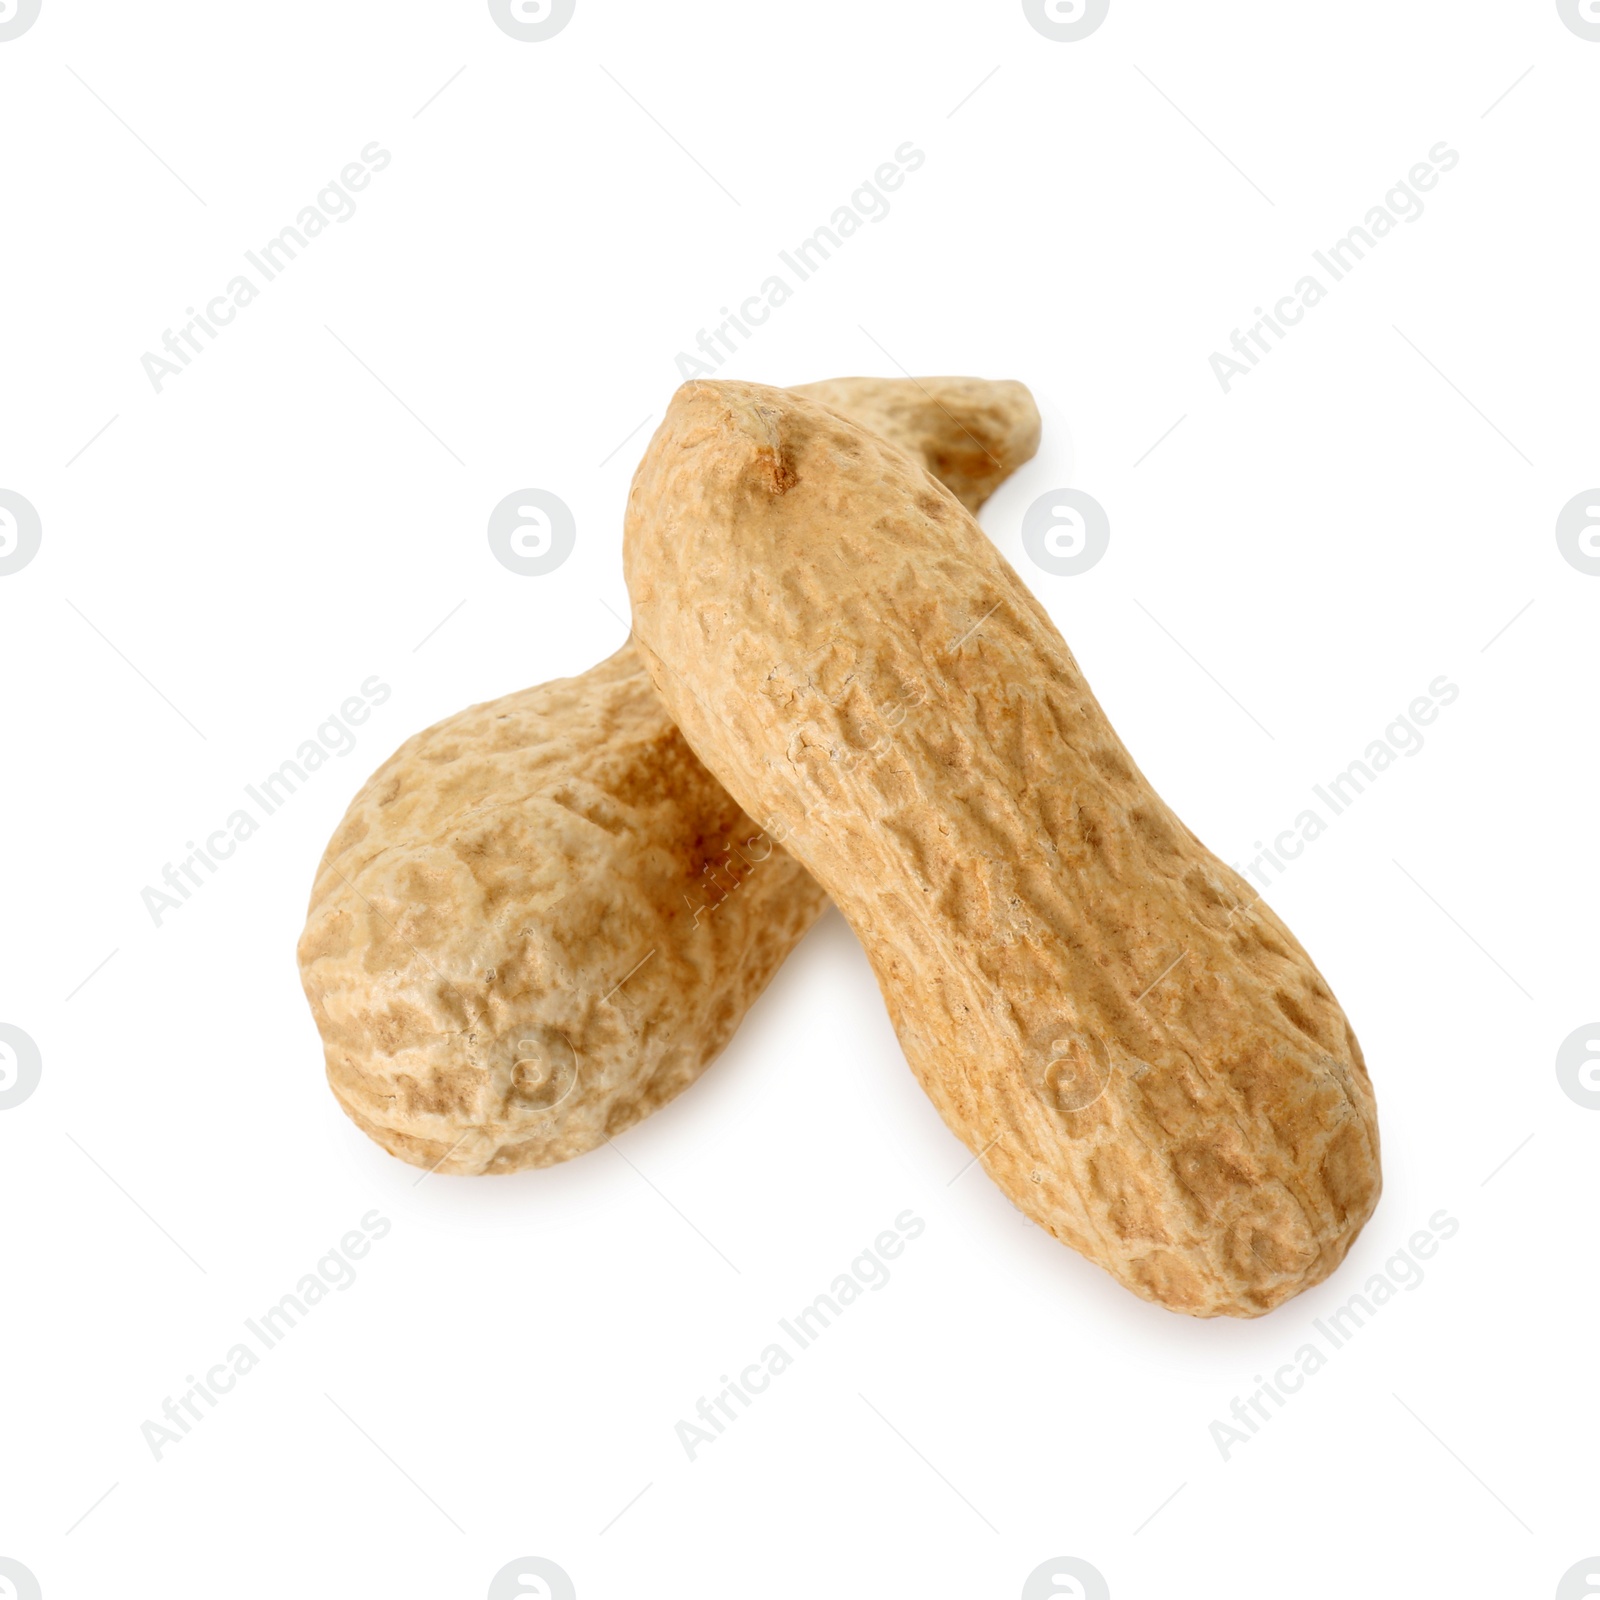 Photo of Two fresh unpeeled peanuts isolated on white